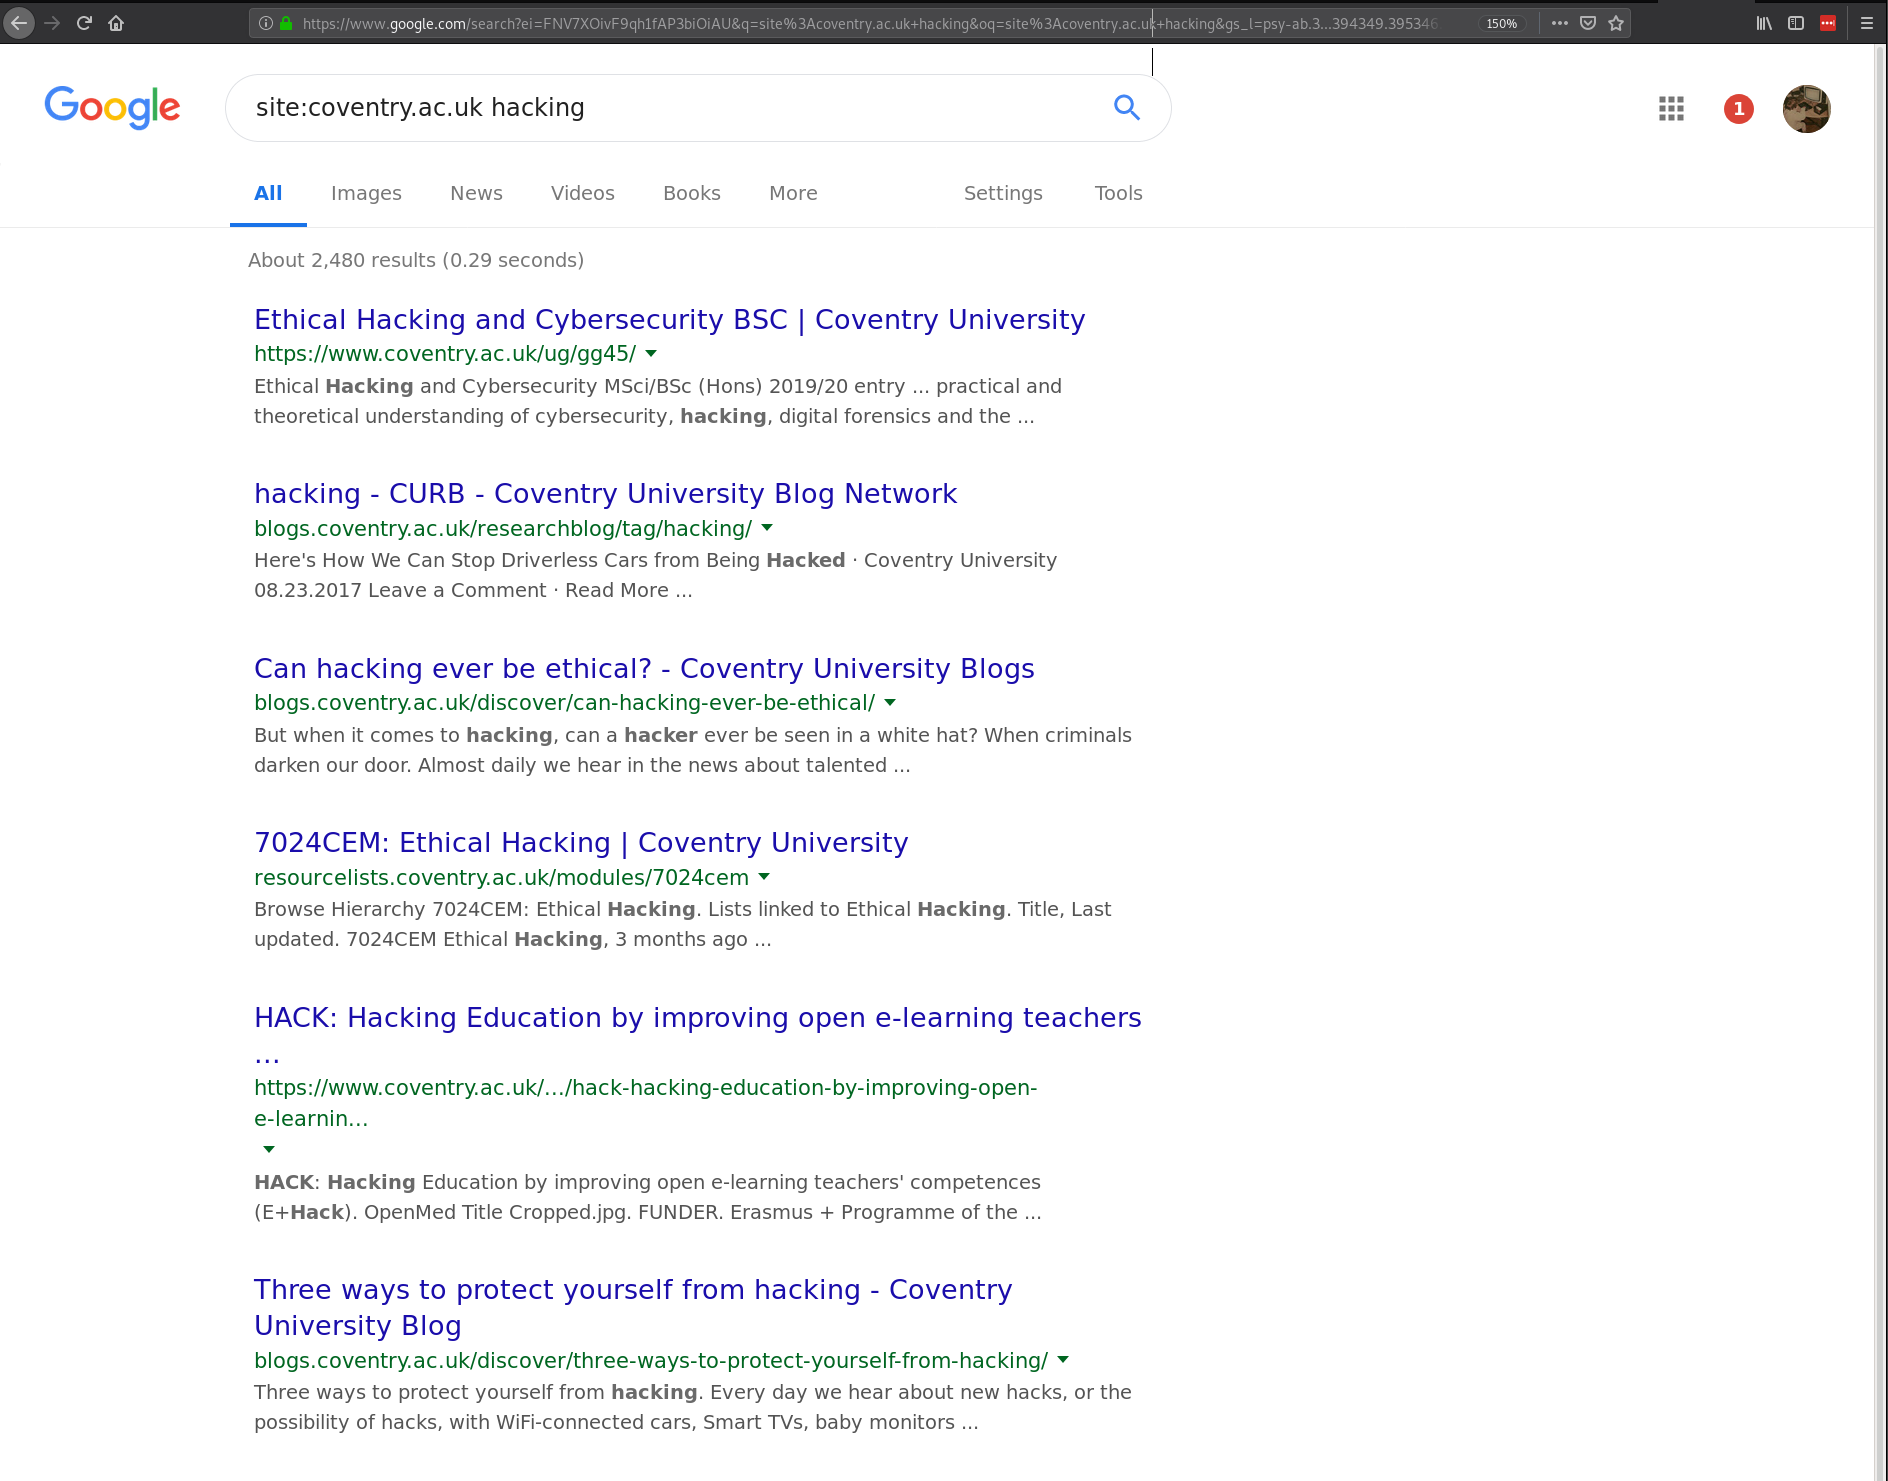 Limiting search results to a site